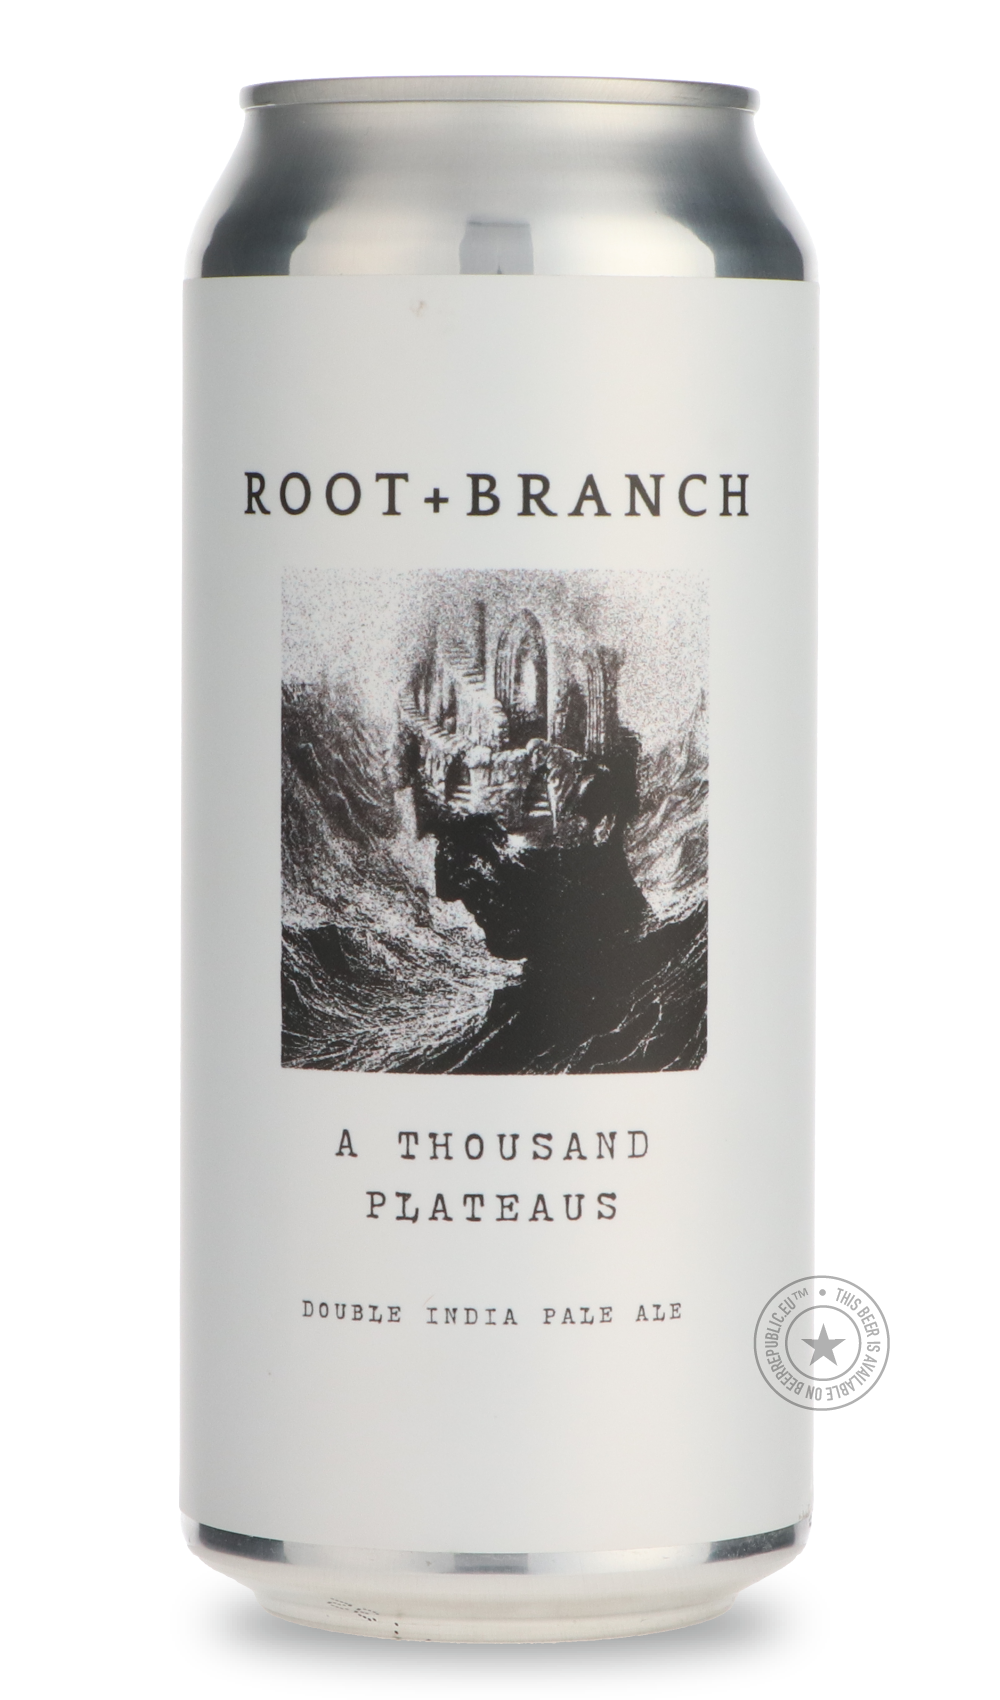 -Root + Branch- A Thousand Plateaus-IPA- Only @ Beer Republic - The best online beer store for American & Canadian craft beer - Buy beer online from the USA and Canada - Bier online kopen - Amerikaans bier kopen - Craft beer store - Craft beer kopen - Amerikanisch bier kaufen - Bier online kaufen - Acheter biere online - IPA - Stout - Porter - New England IPA - Hazy IPA - Imperial Stout - Barrel Aged - Barrel Aged Imperial Stout - Brown - Dark beer - Blond - Blonde - Pilsner - Lager - Wheat - Weizen - Amber